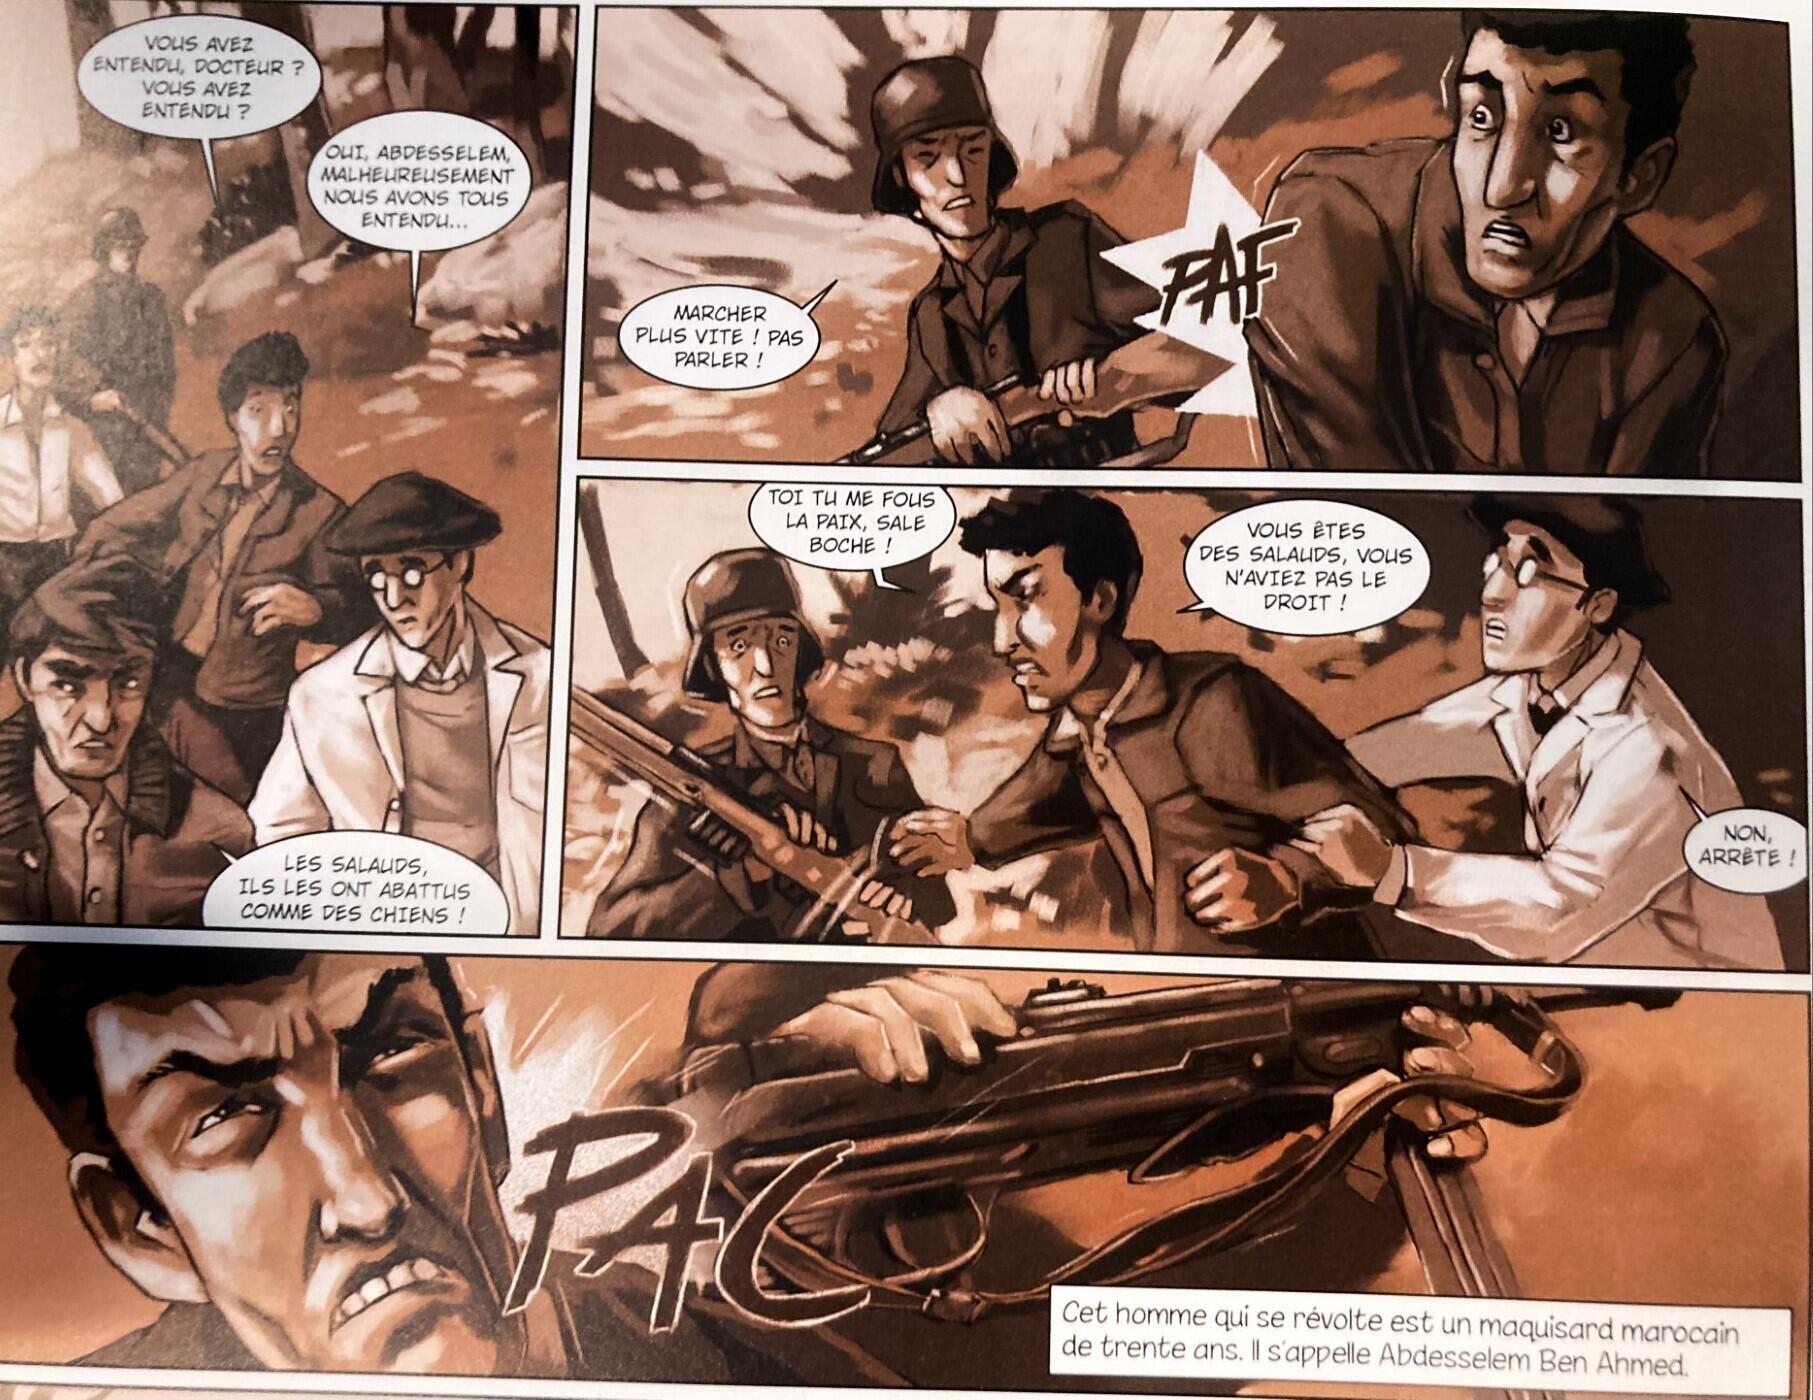 An extract from Kamel Mouellef’s comic book on the African Resistance fighters.